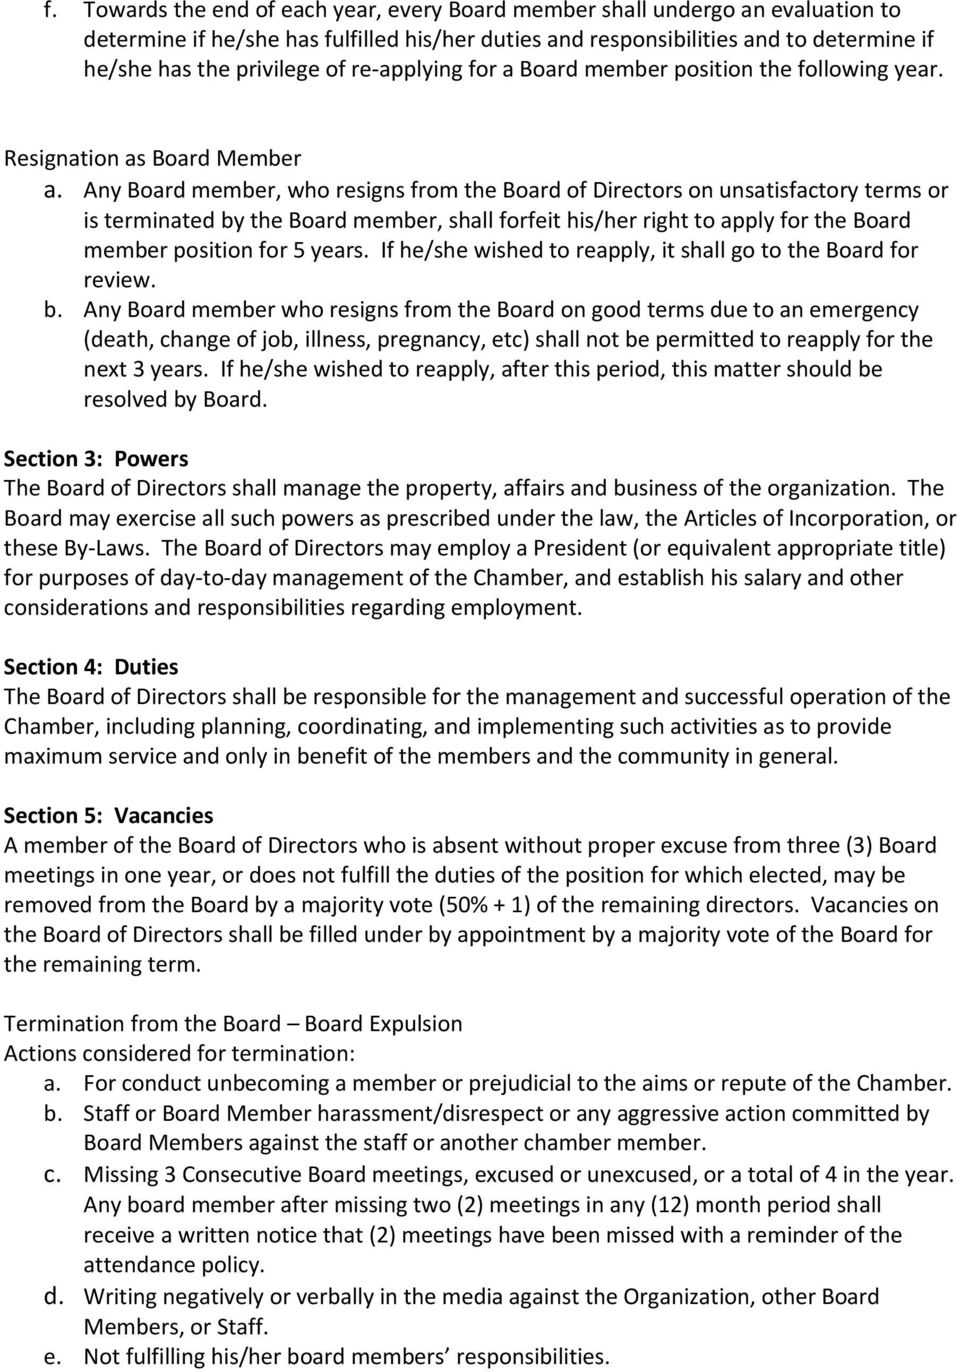 Any Board member, who resigns from the Board of Directors on unsatisfactory terms or is terminated by the Board member, shall forfeit his/her right to apply for the Board member position for 5 years.